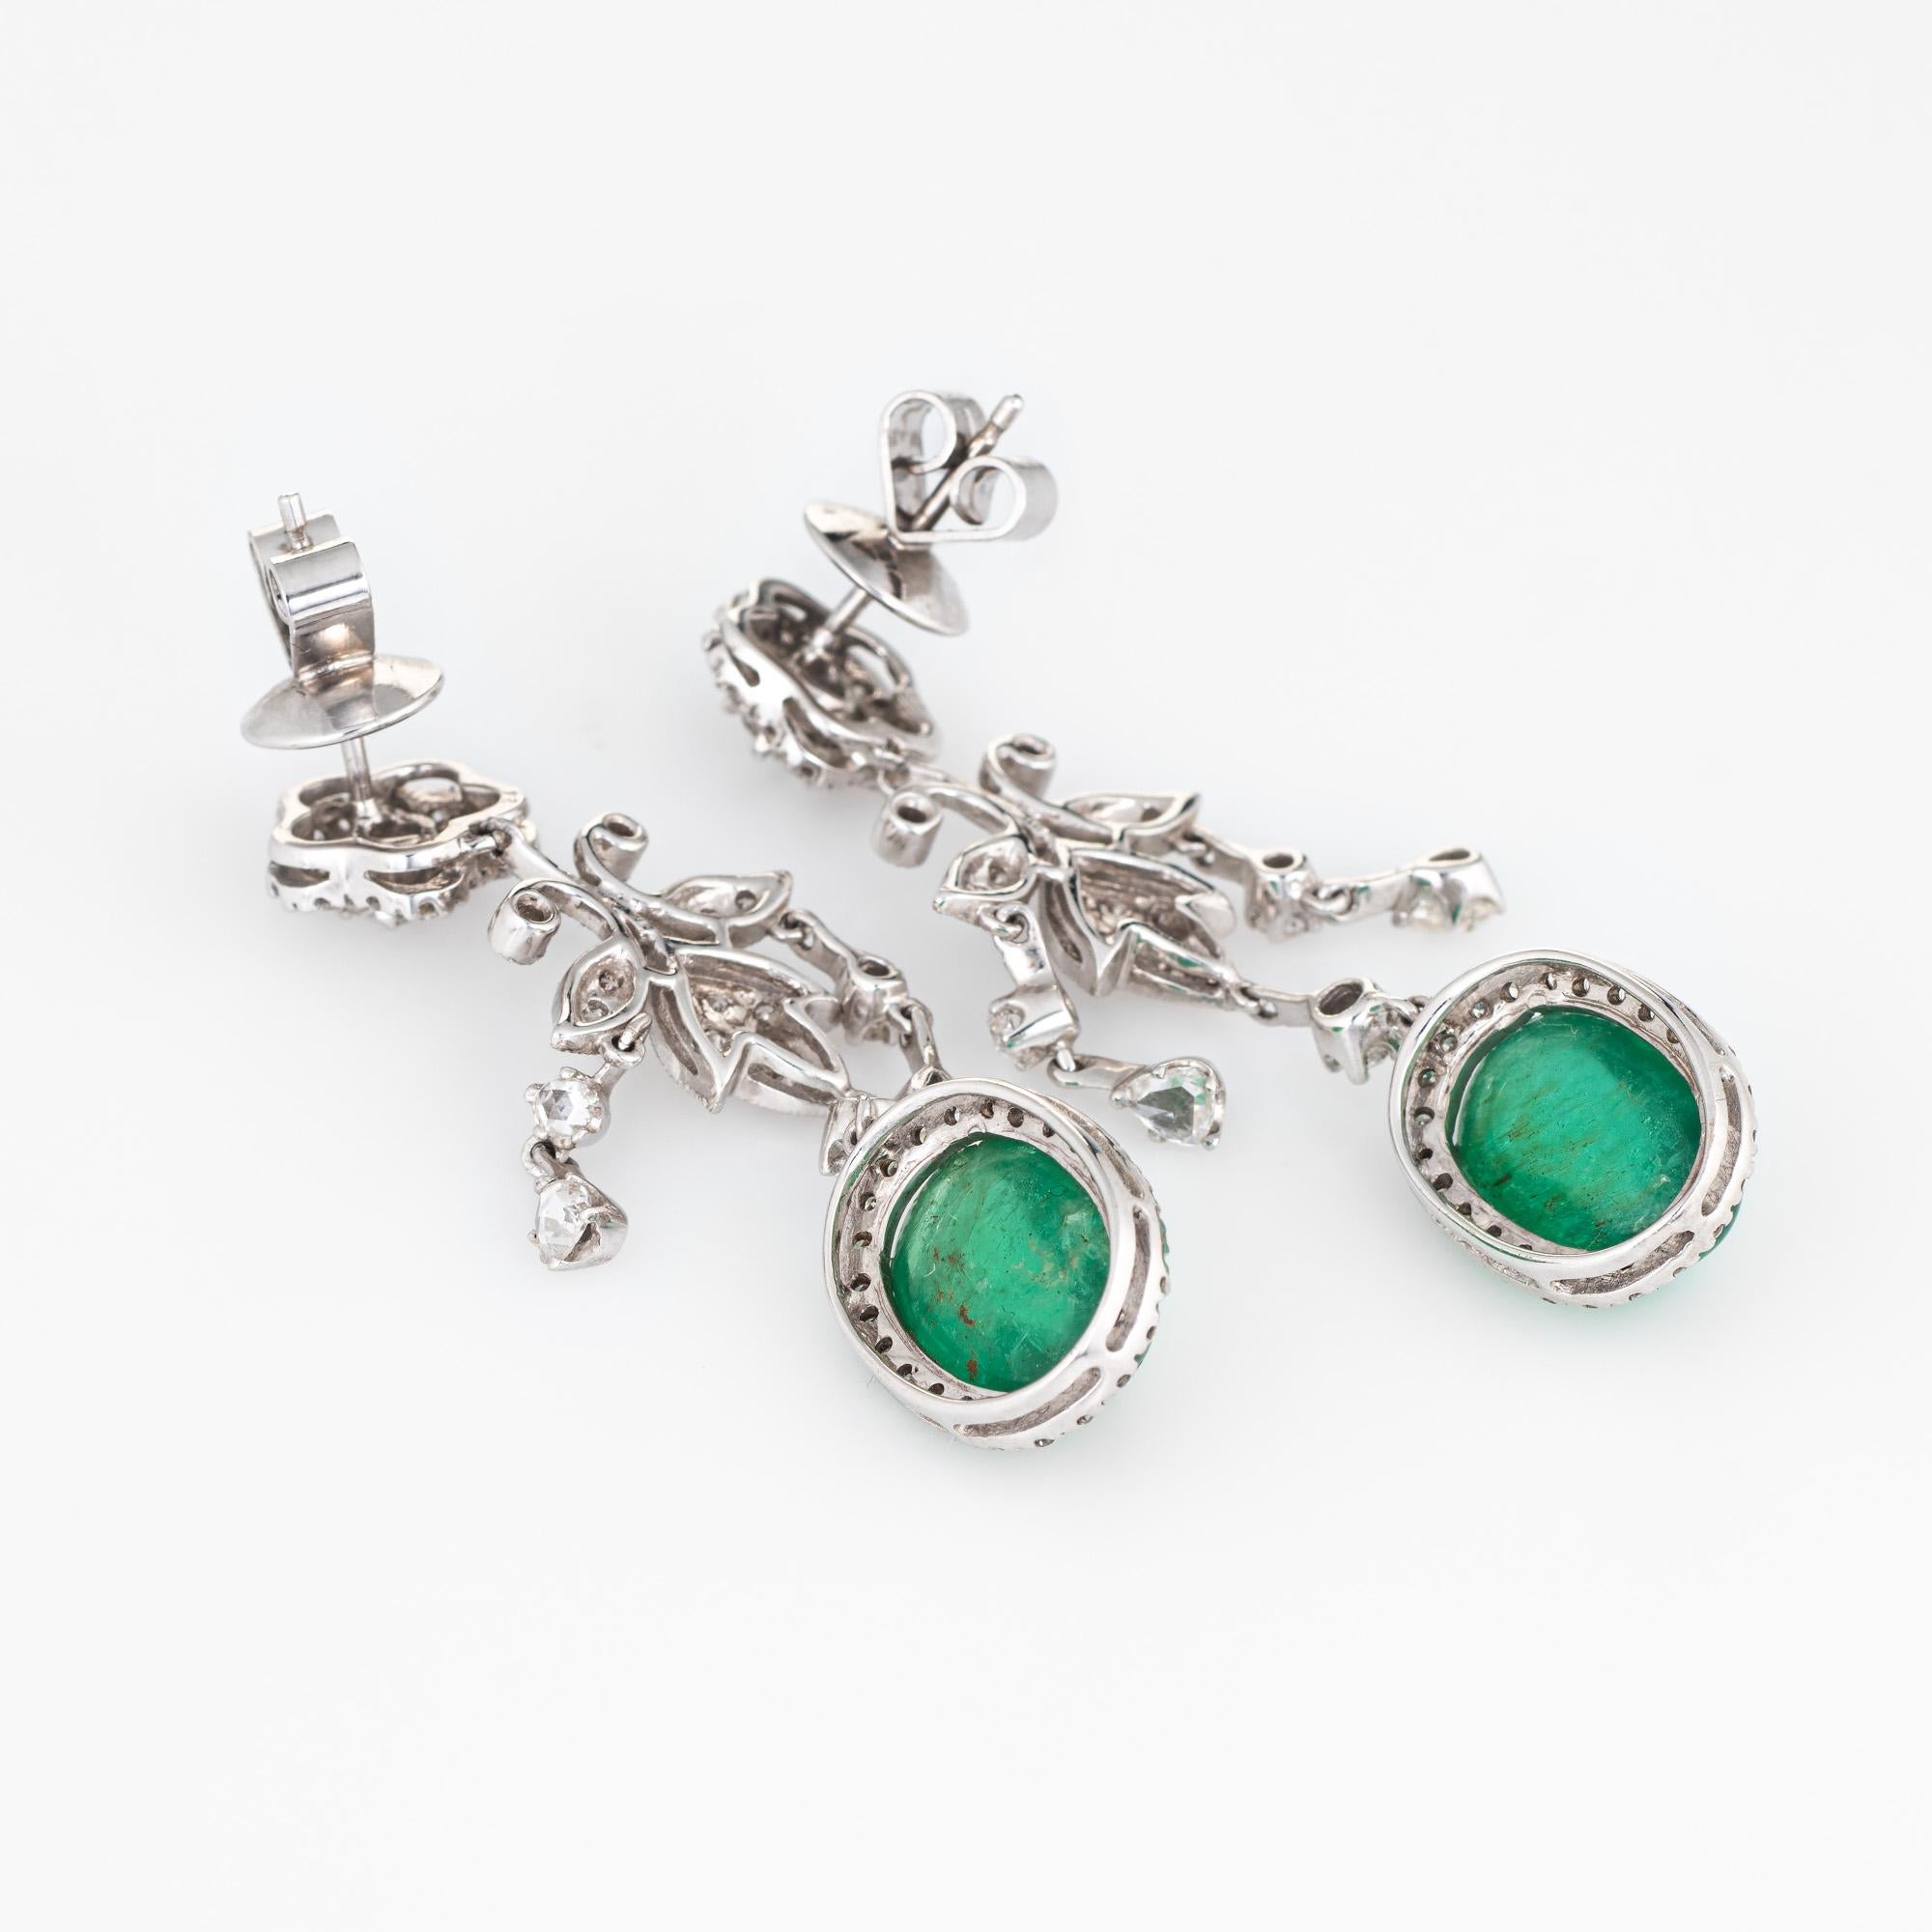 Elegant pair of estate diamond & emerald drop earrings crafted in 18k yellow gold. 

Rose & round brilliant cut diamonds total an estimated 1.50 carats (estimated at H-I color and VS2-I1 clarity). The cabochon cut emeralds each measure 12mm x 8.5mm